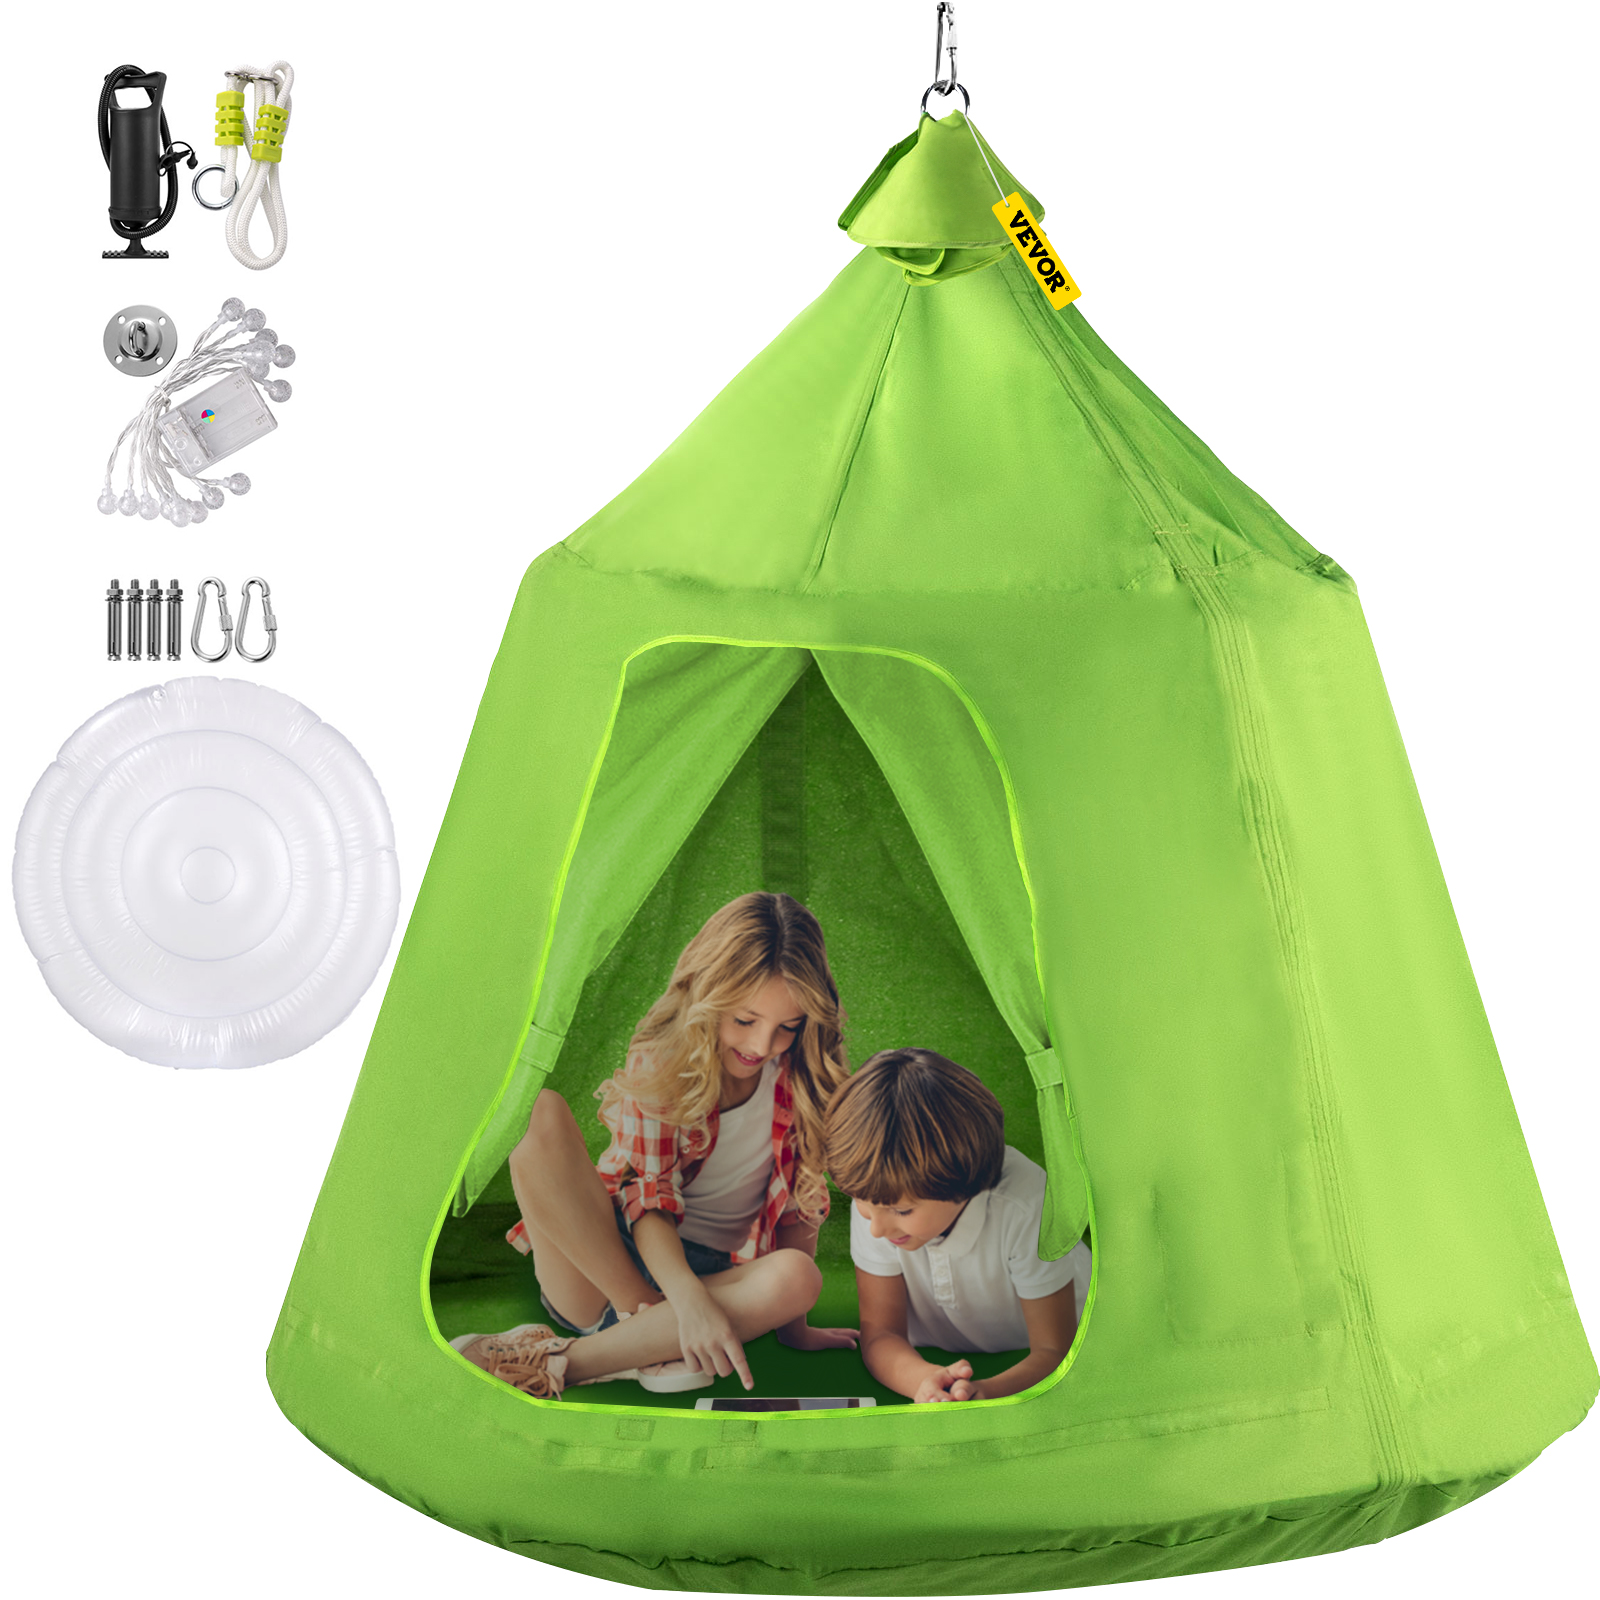 LUXE Kids Teepee Tent REPLACEMENT COVER (COVER ONLY) –